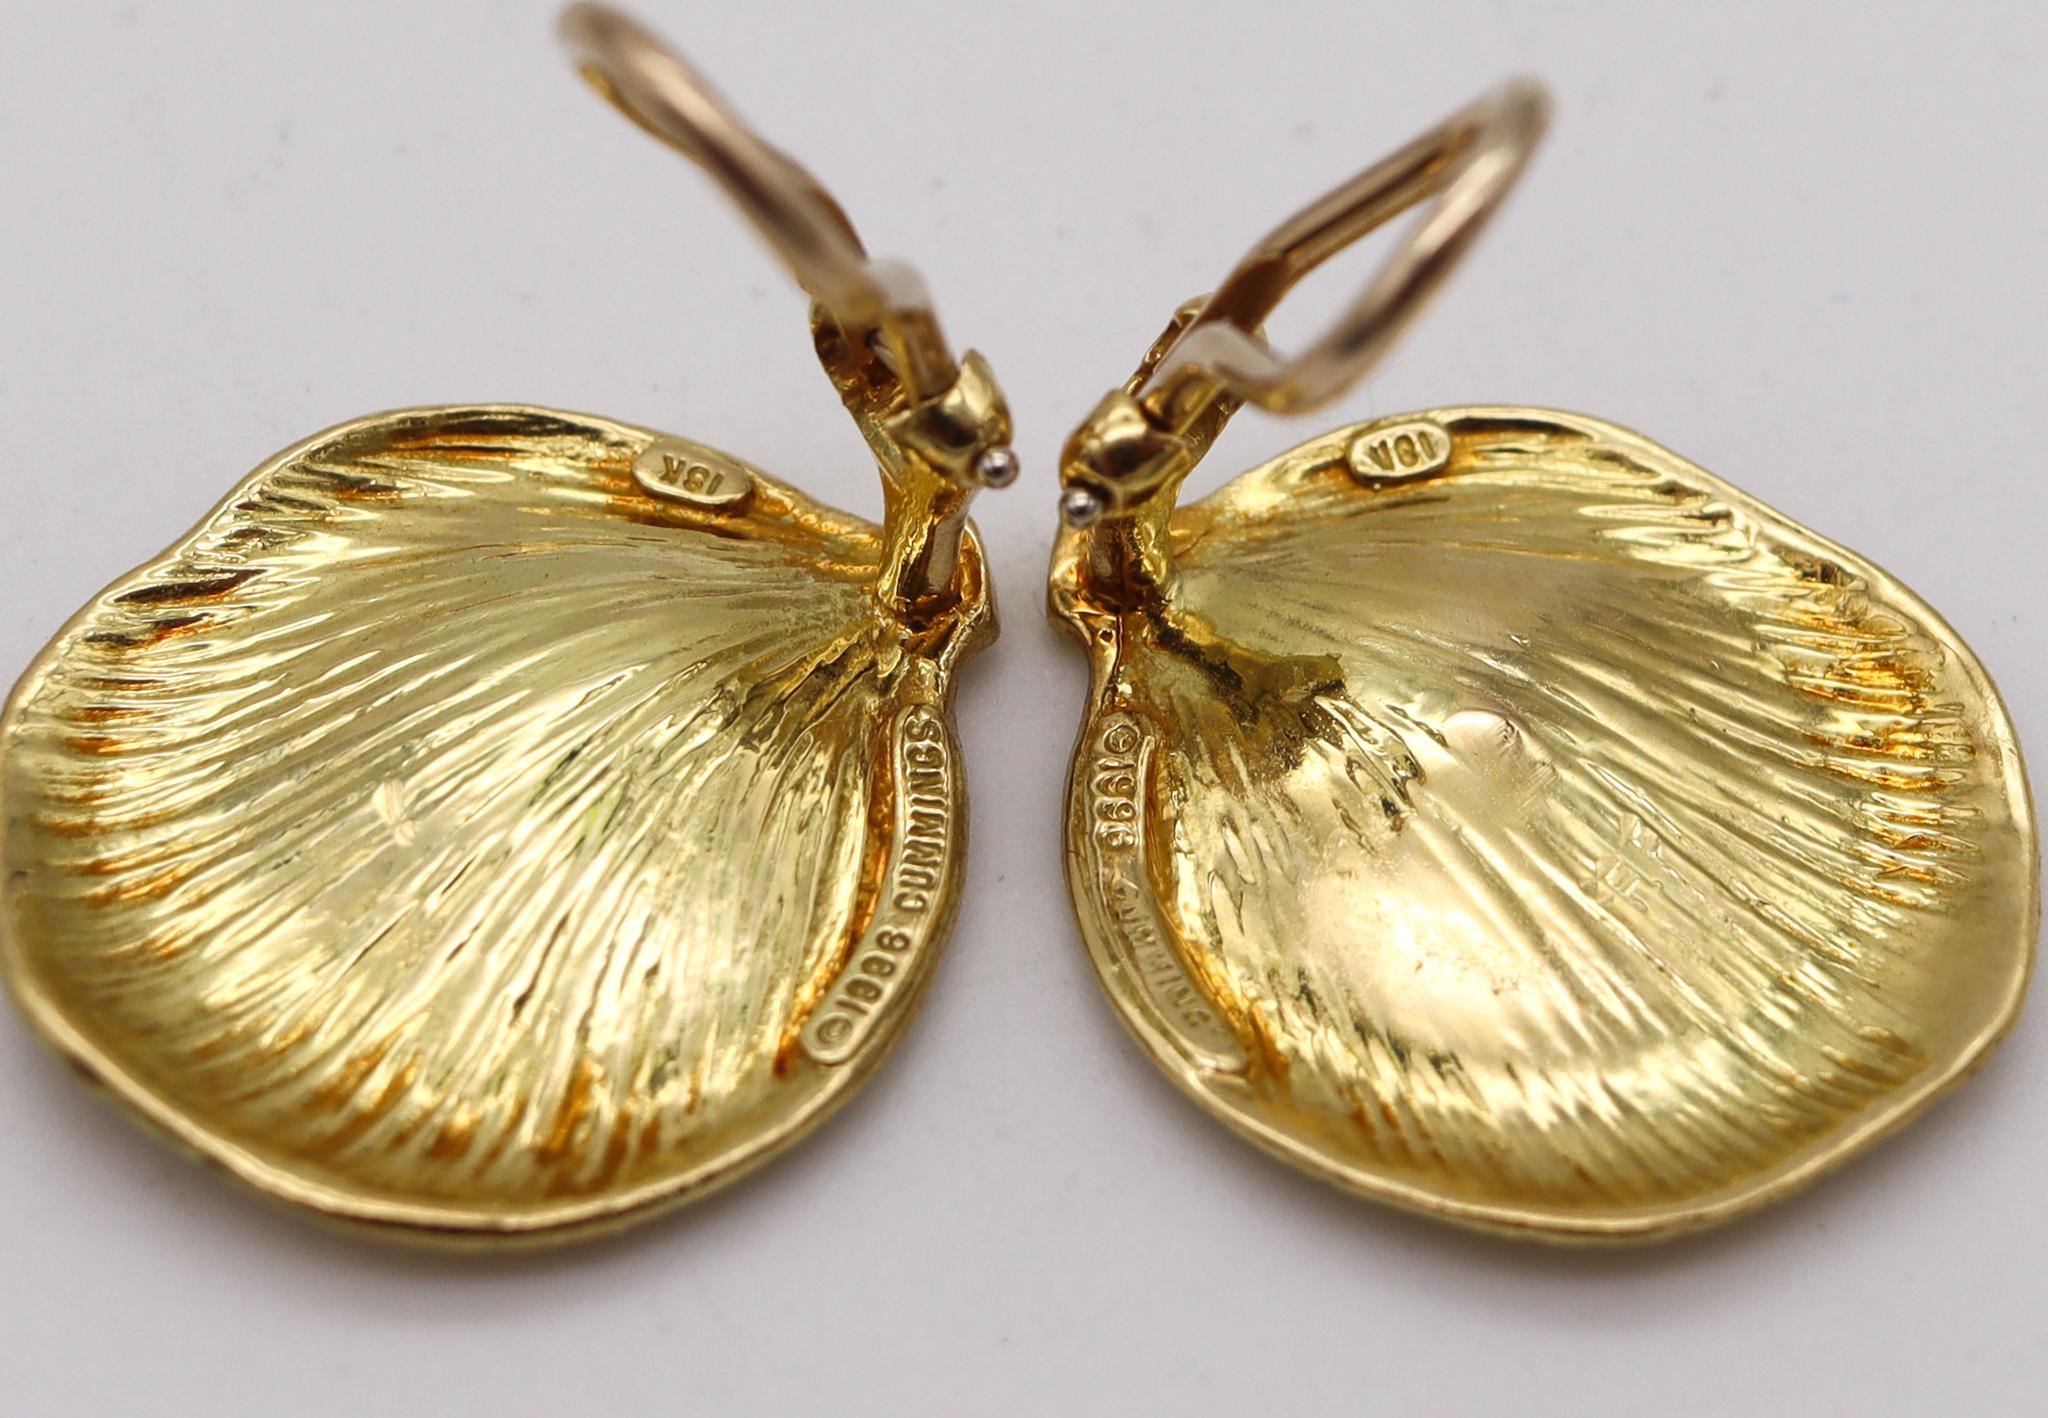 Angela Cummings Studio 1993 Textured Petals Earrings in Solid 18kt Yellow Gold In Excellent Condition For Sale In Miami, FL